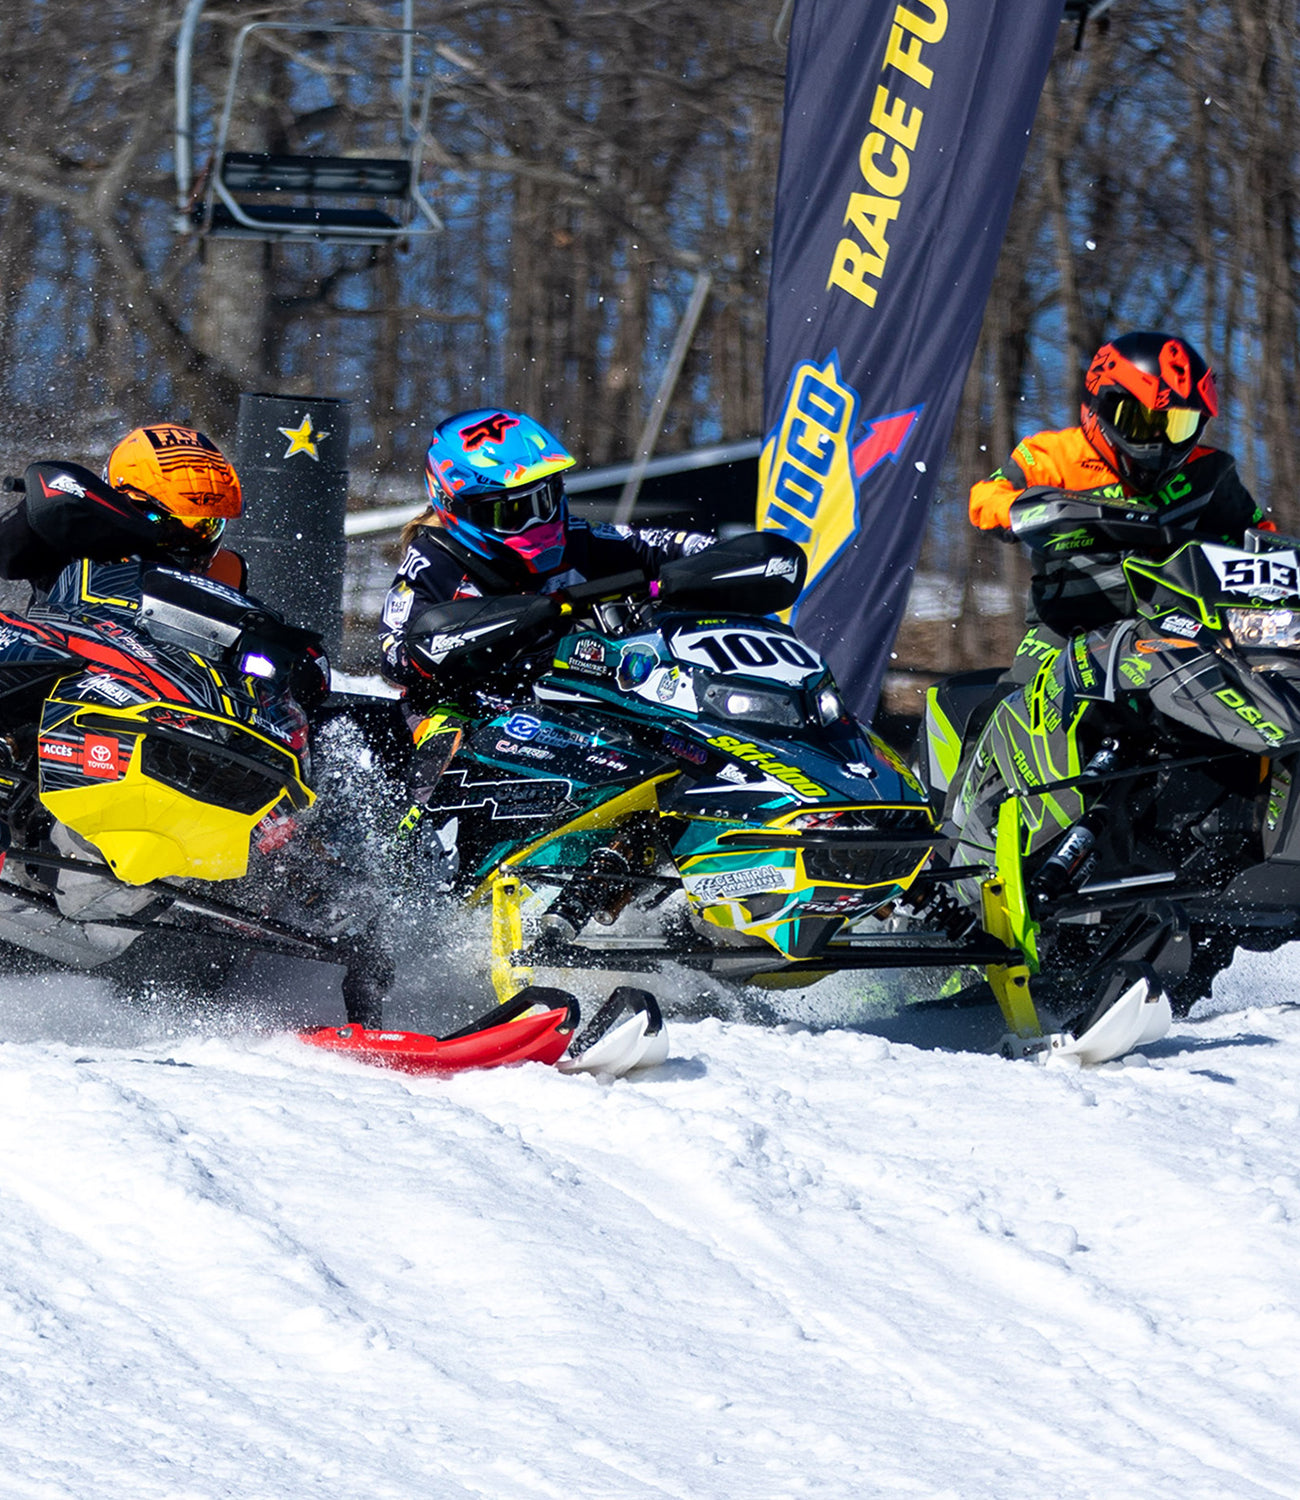 CSRA Snocross racers with C&A Pro Skis